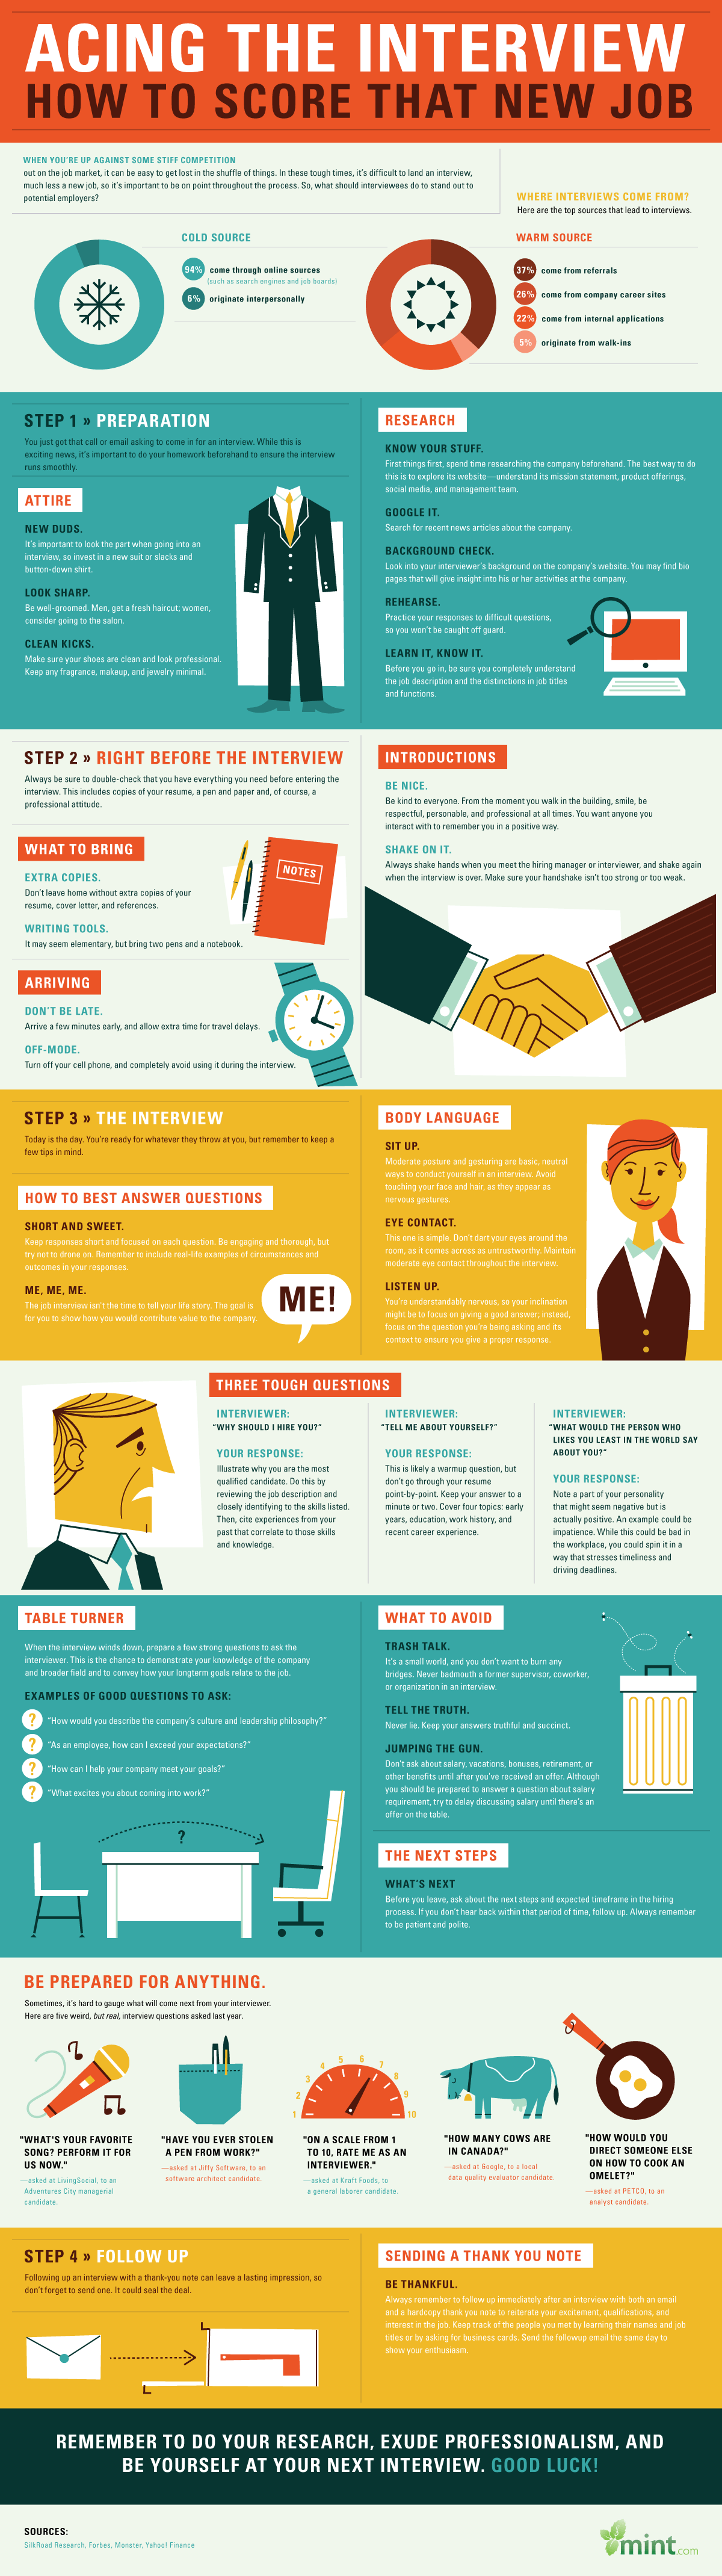 How-to-Ace-a-Job-Interview